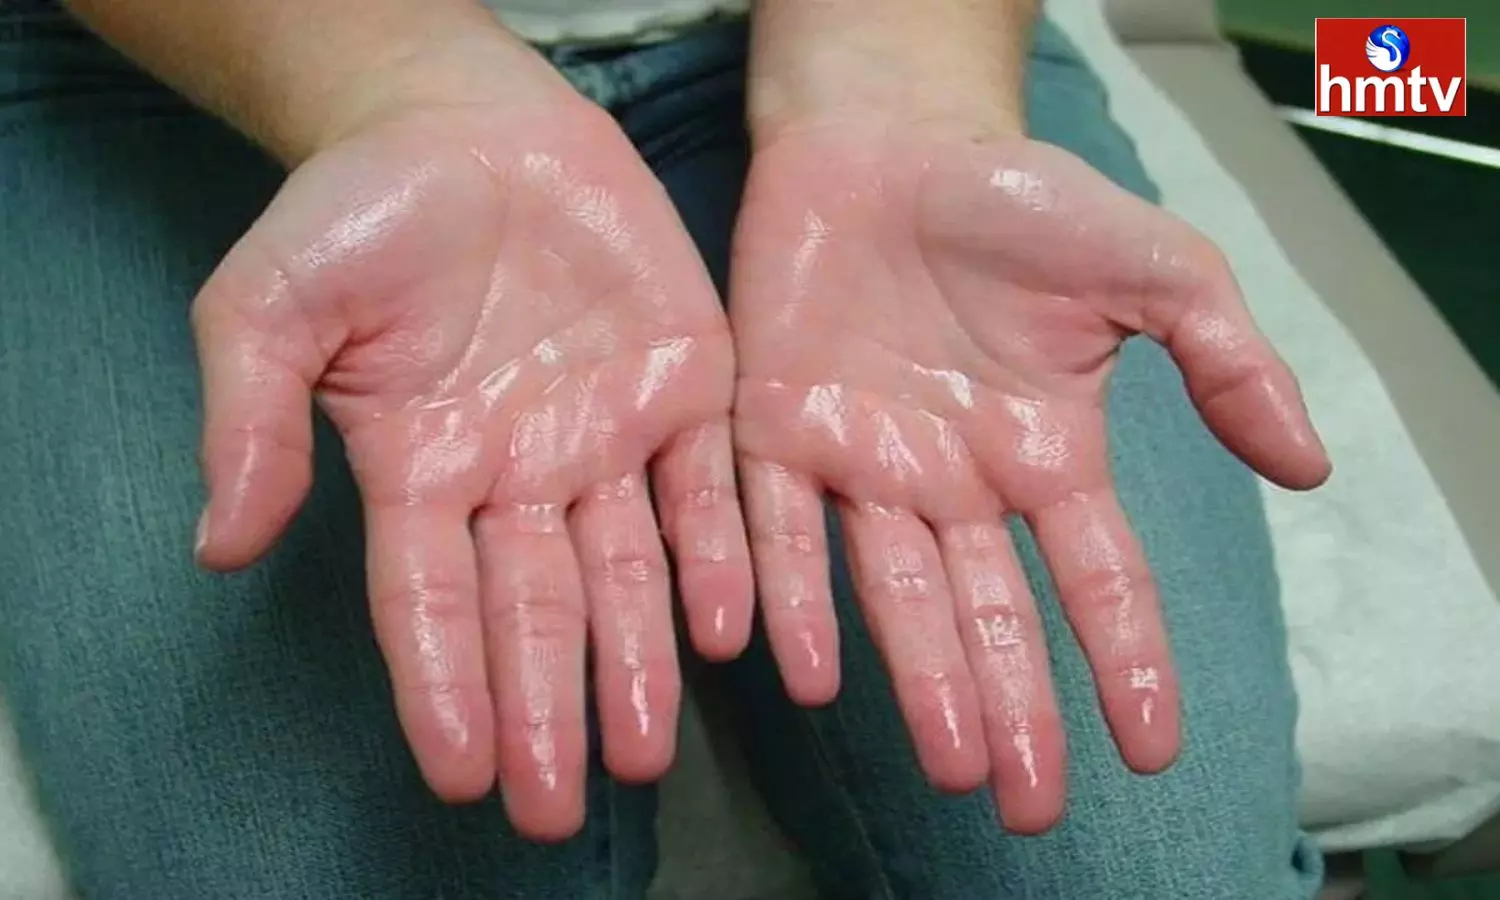 Are Your Palms Sweating It May Be A Dangerous Disease